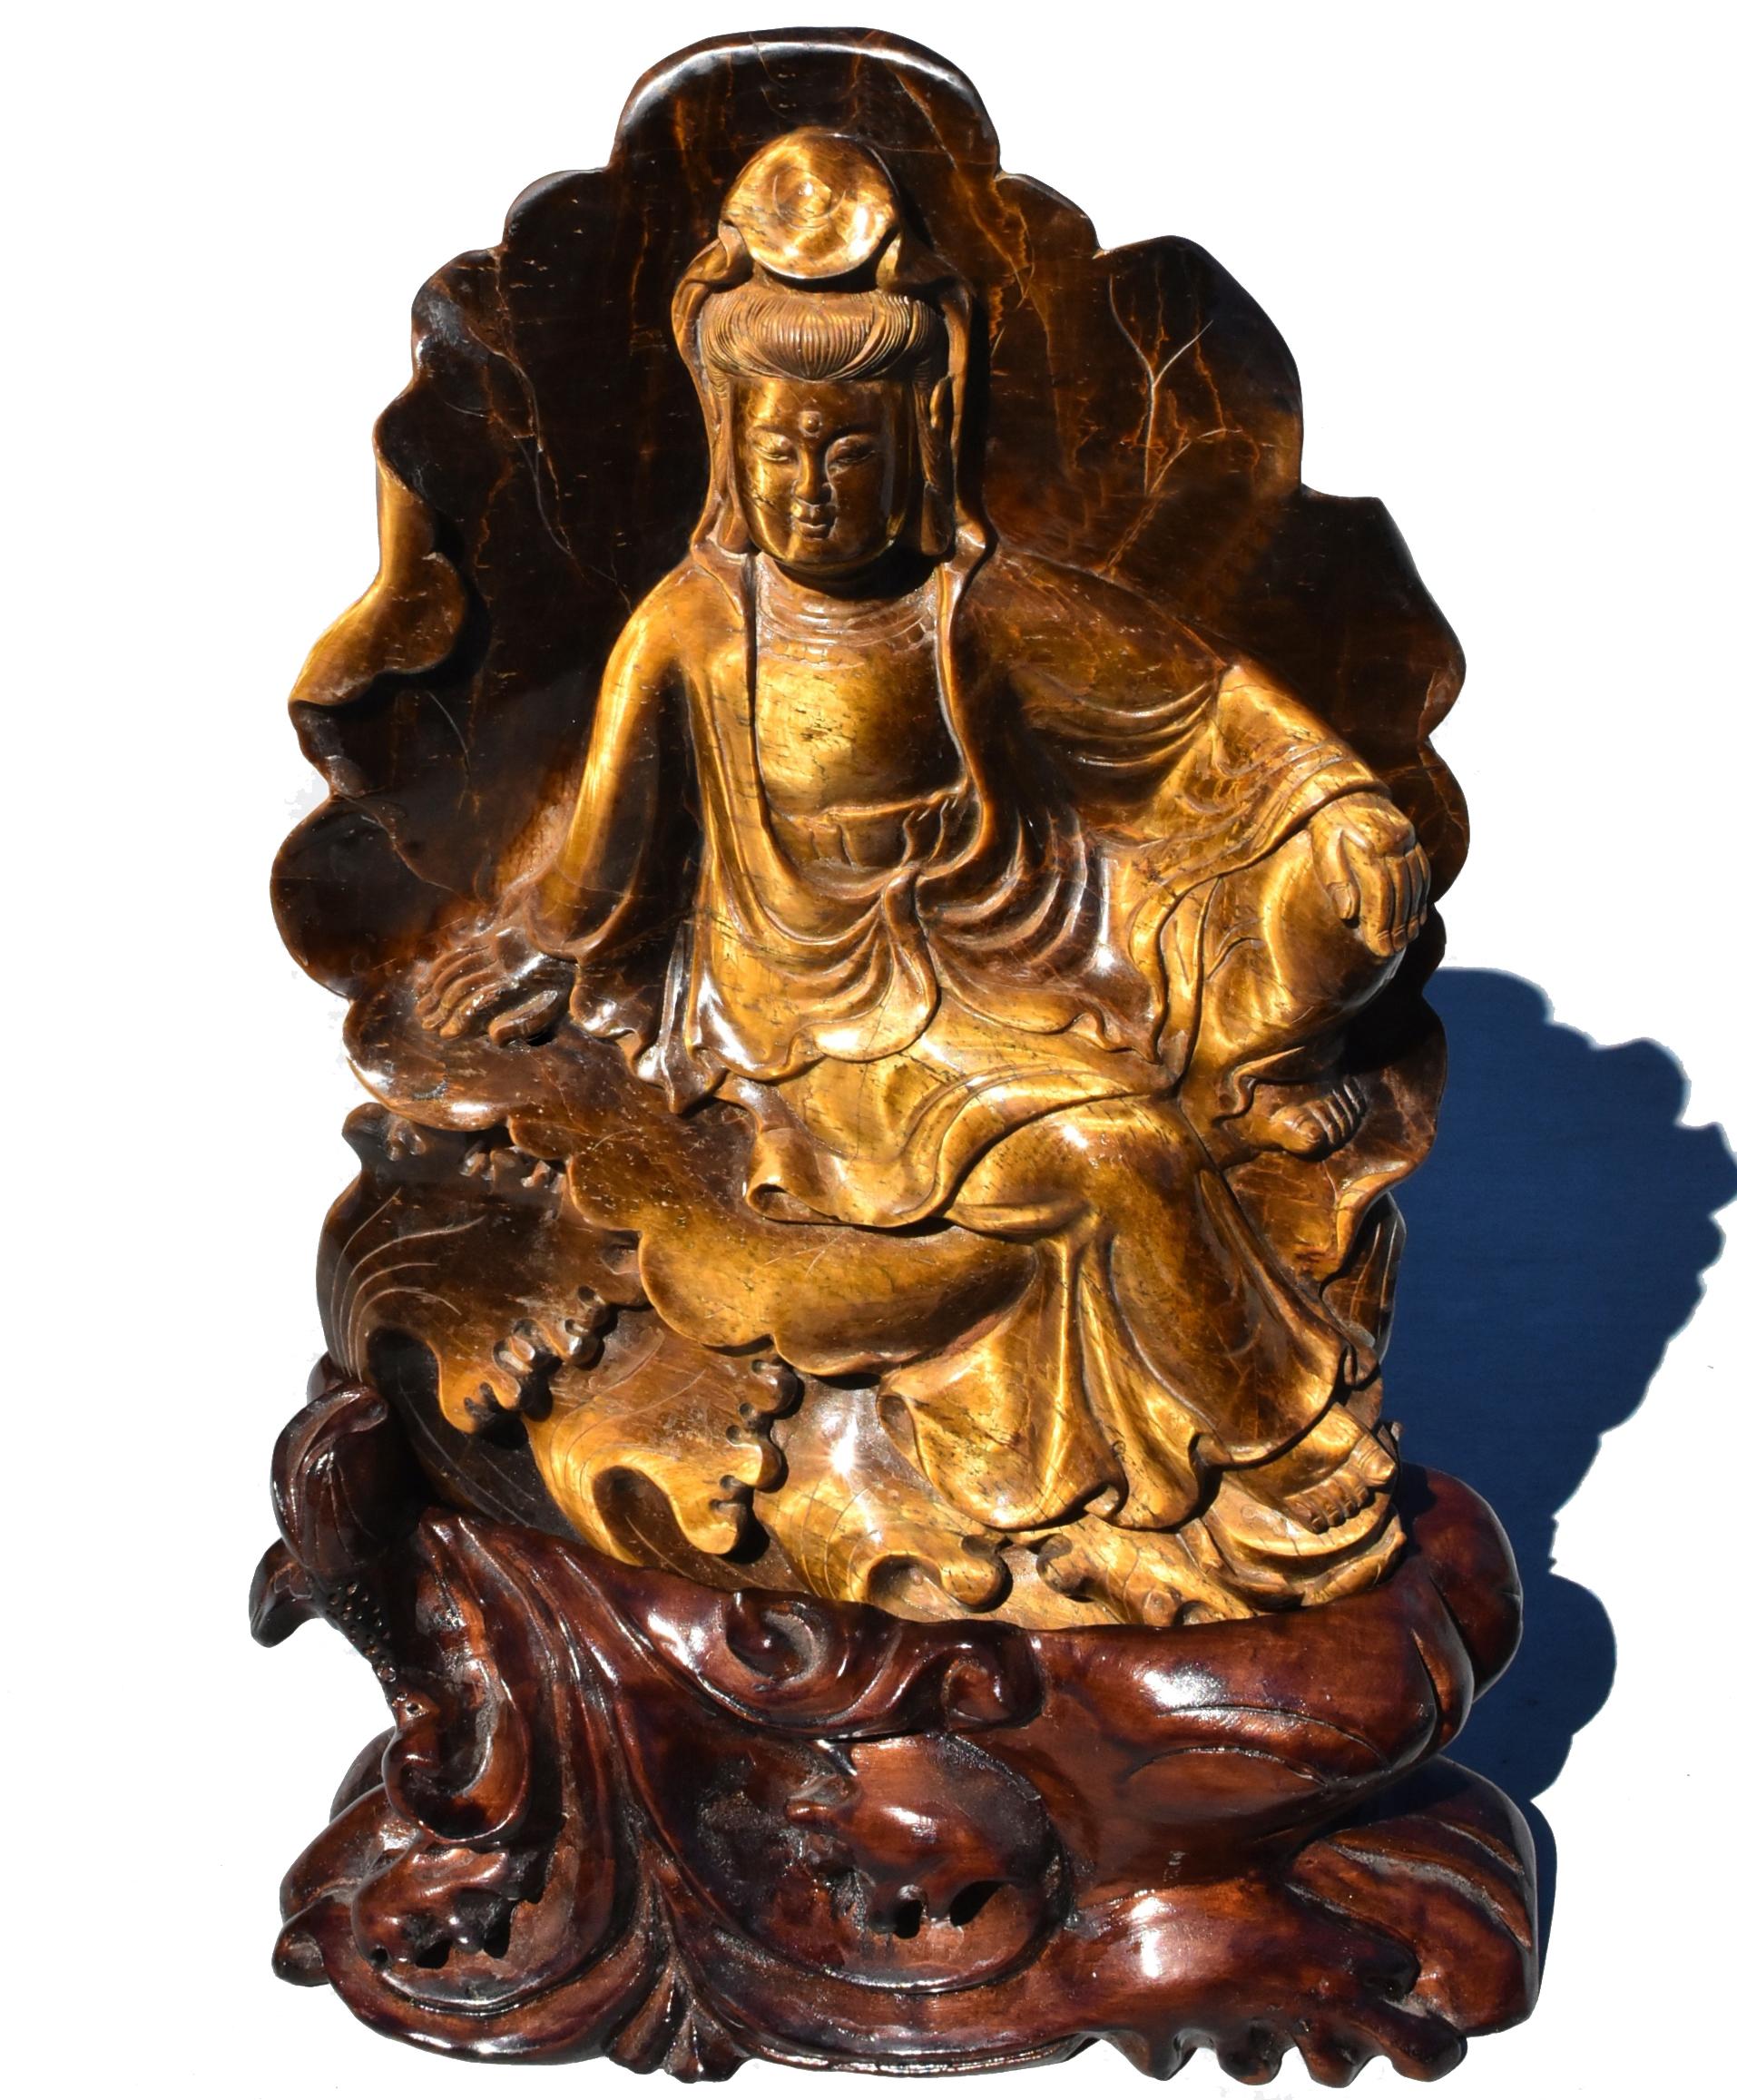 A magnificent natural Tiger's Eye sculpture depicting the compassionate Bodhisattva Water Moon Guan Yin, Avalokiteshvara. Backed by a lotus leaf and on top of water wavers, Avalokiteshvara is shown seated in rajalilasana, the ‘posture of royal